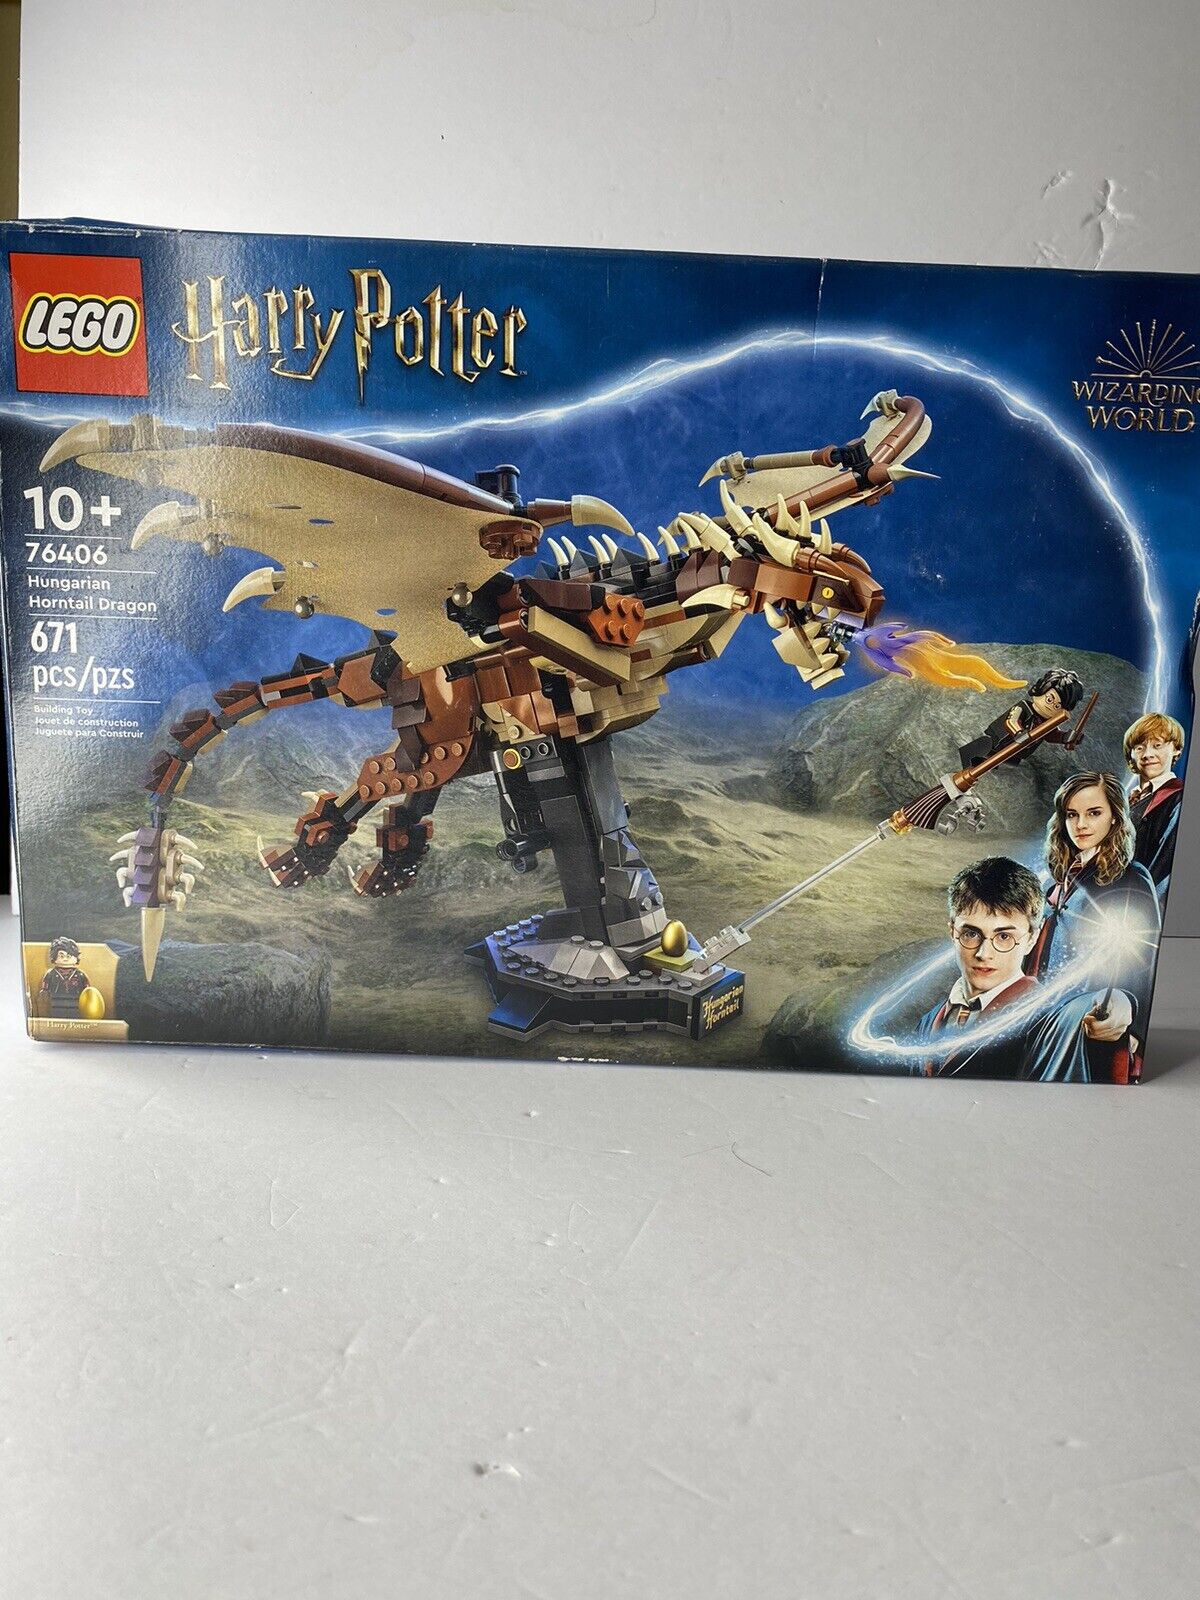 LEGO Harry Potter: Hungarian Horntail Dragon (76406)